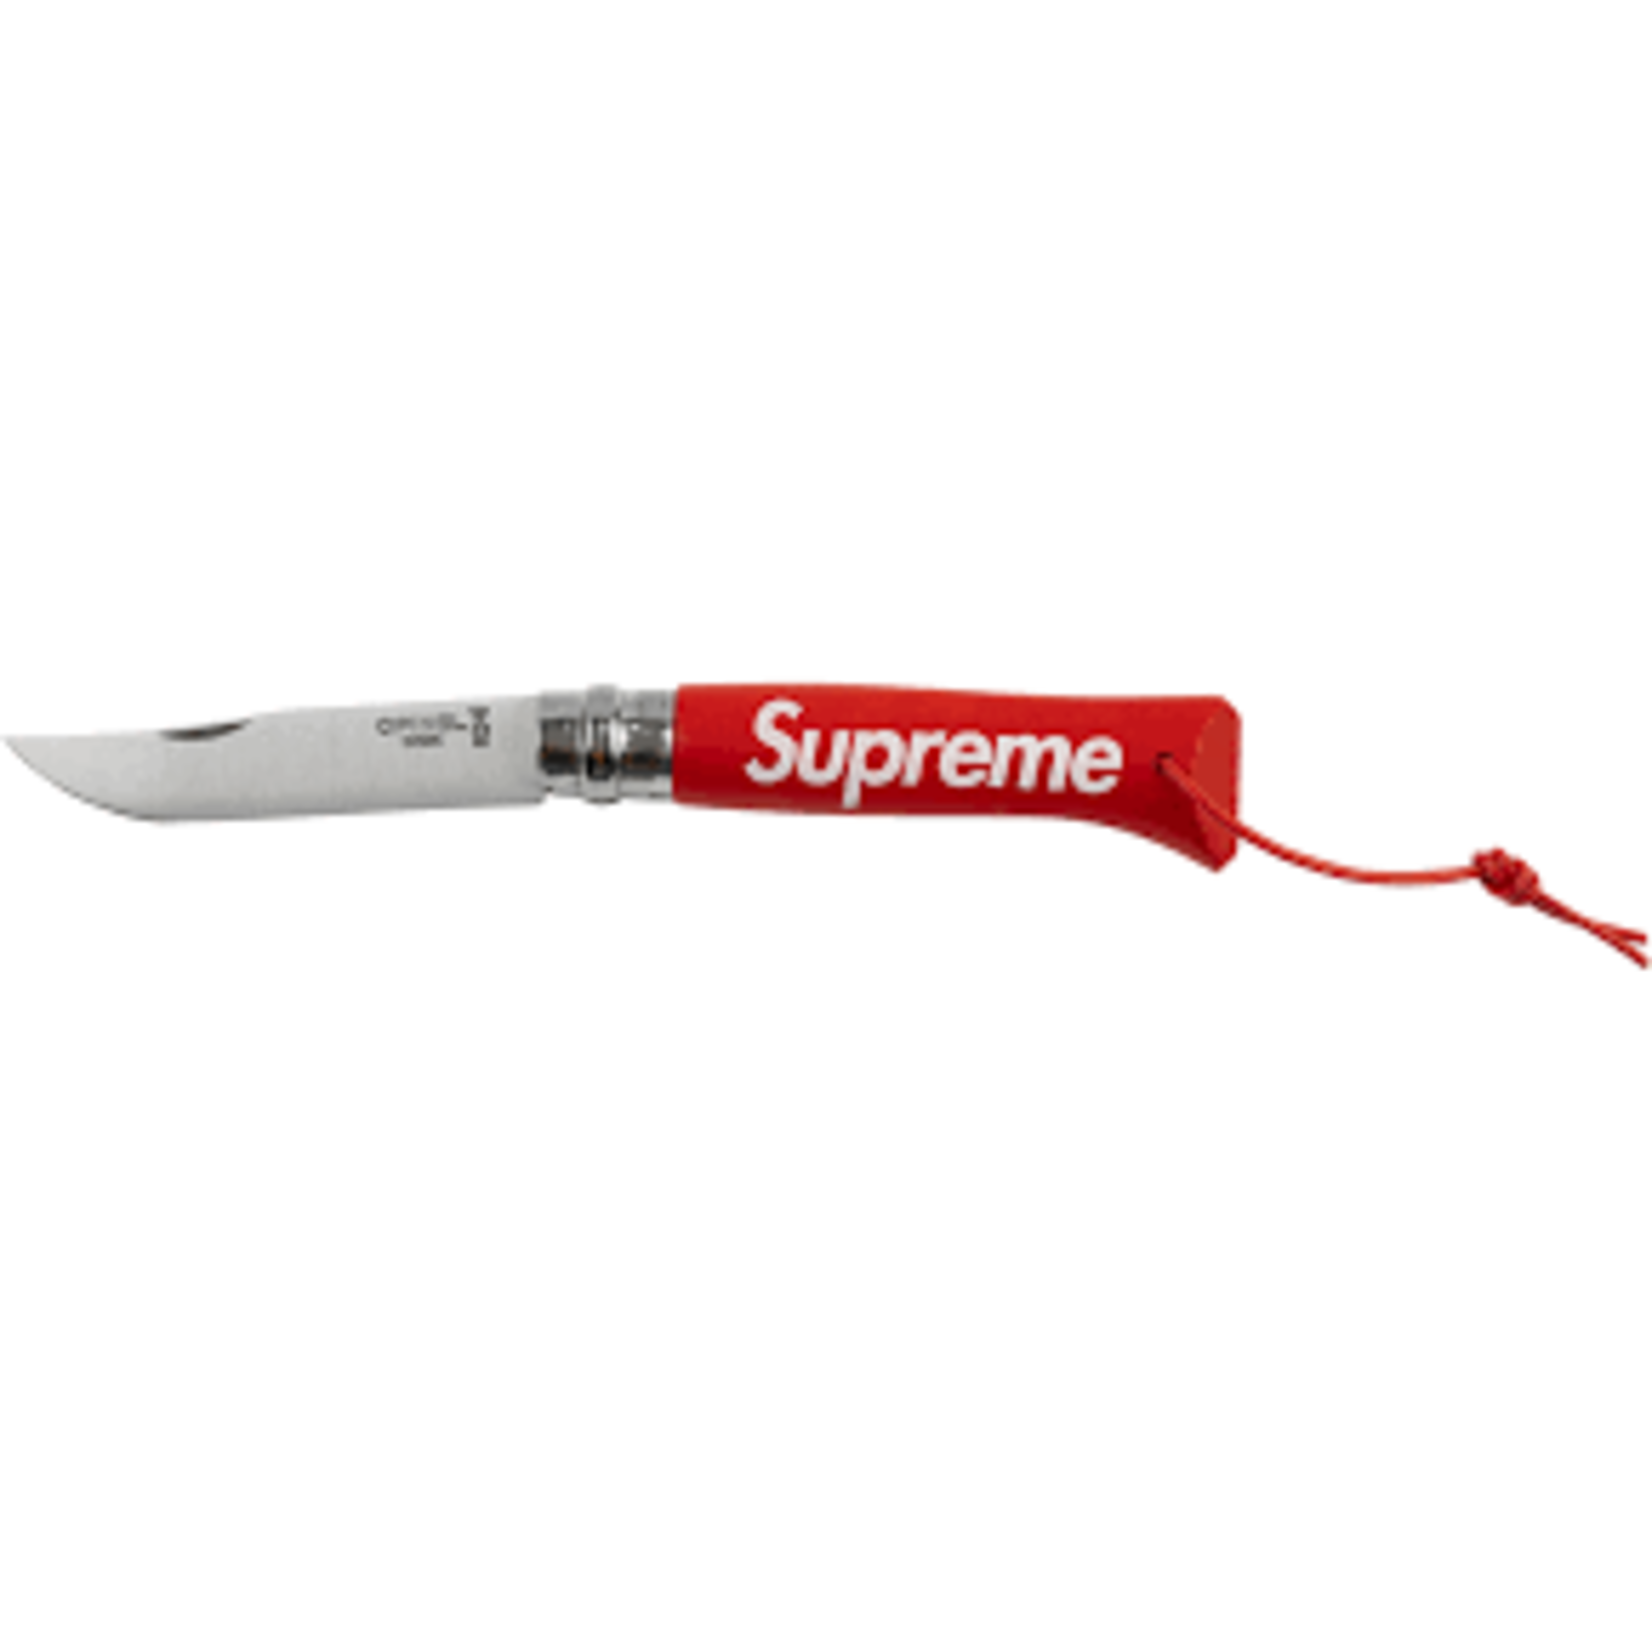 Supreme Supreme Opienl No.08 Folding Knife red Size OS, DS BRAND NEW